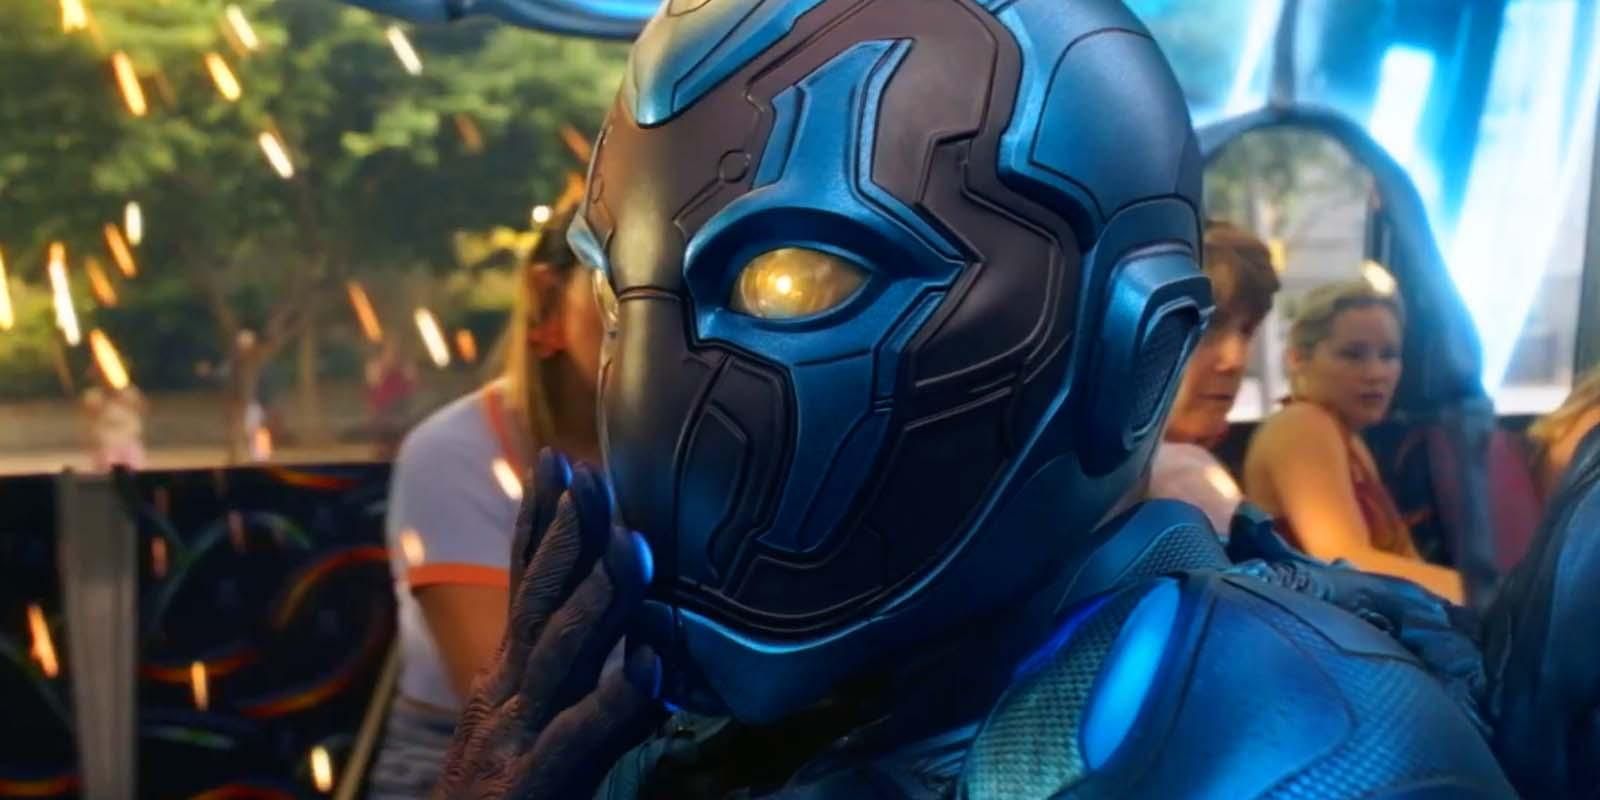 Blue Beetle/Jaime Reyes (Xolo Maridueña) makes a Deadpool-like pose in the official trailer for his solo film.